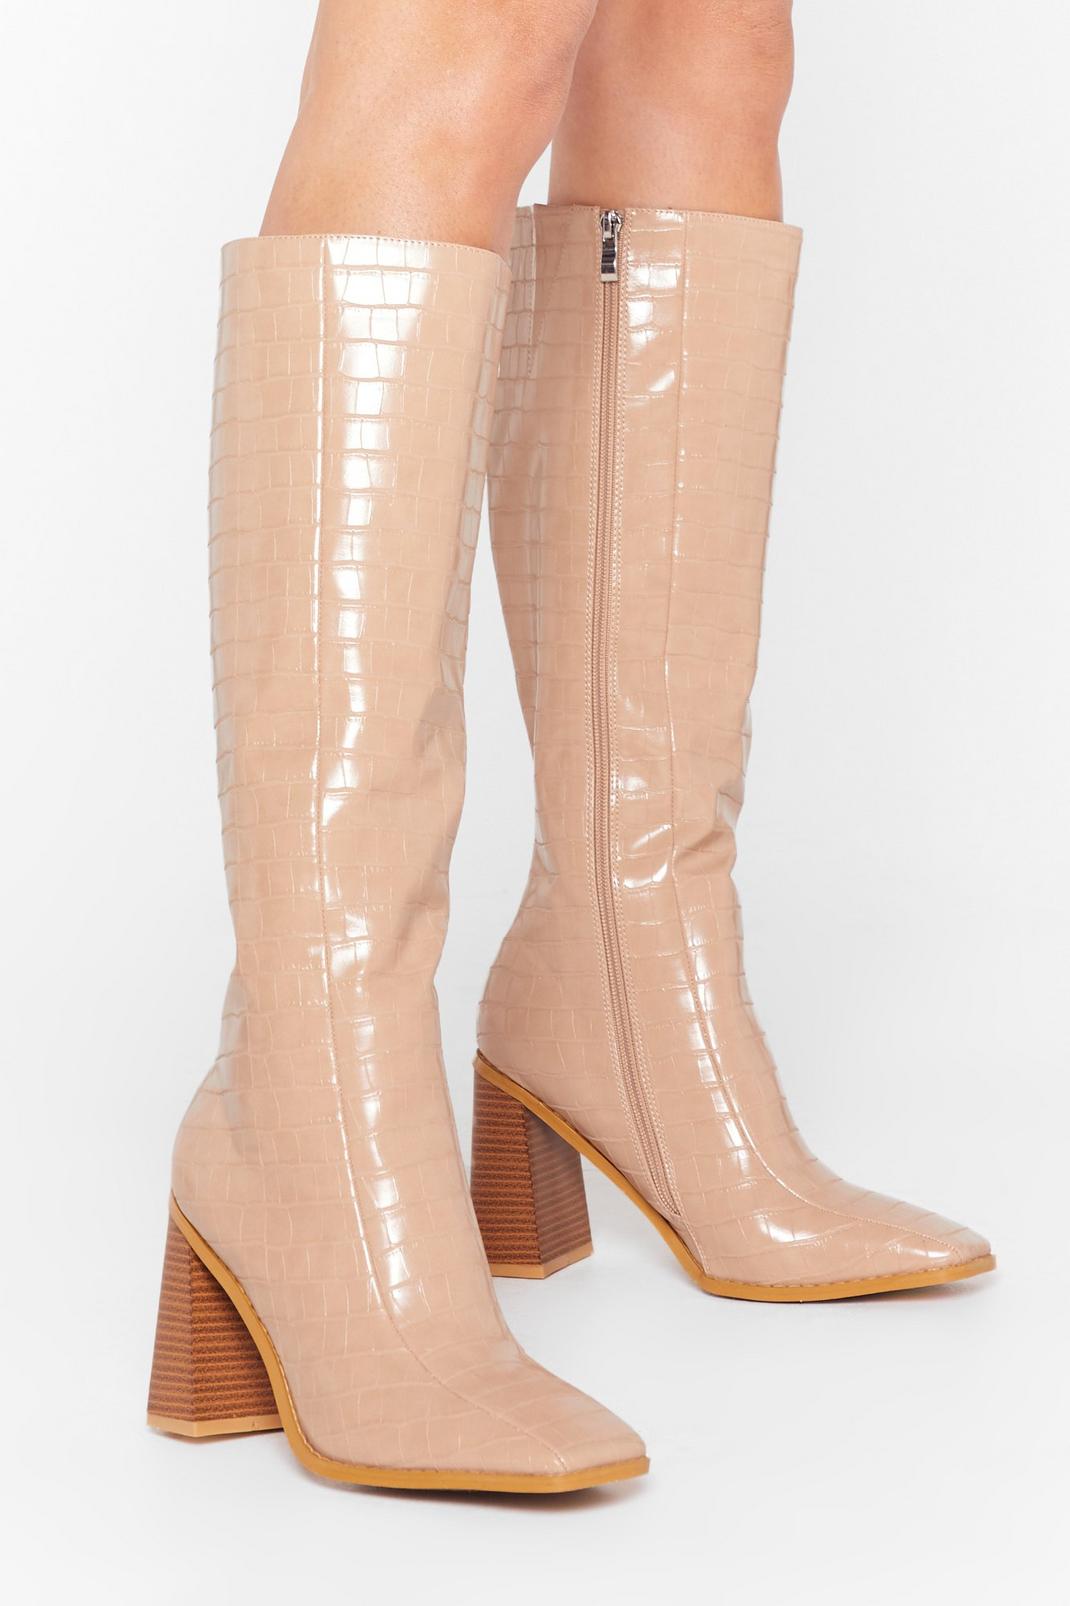 Act as If You Flare Knee-High Croc Boots | Nasty Gal